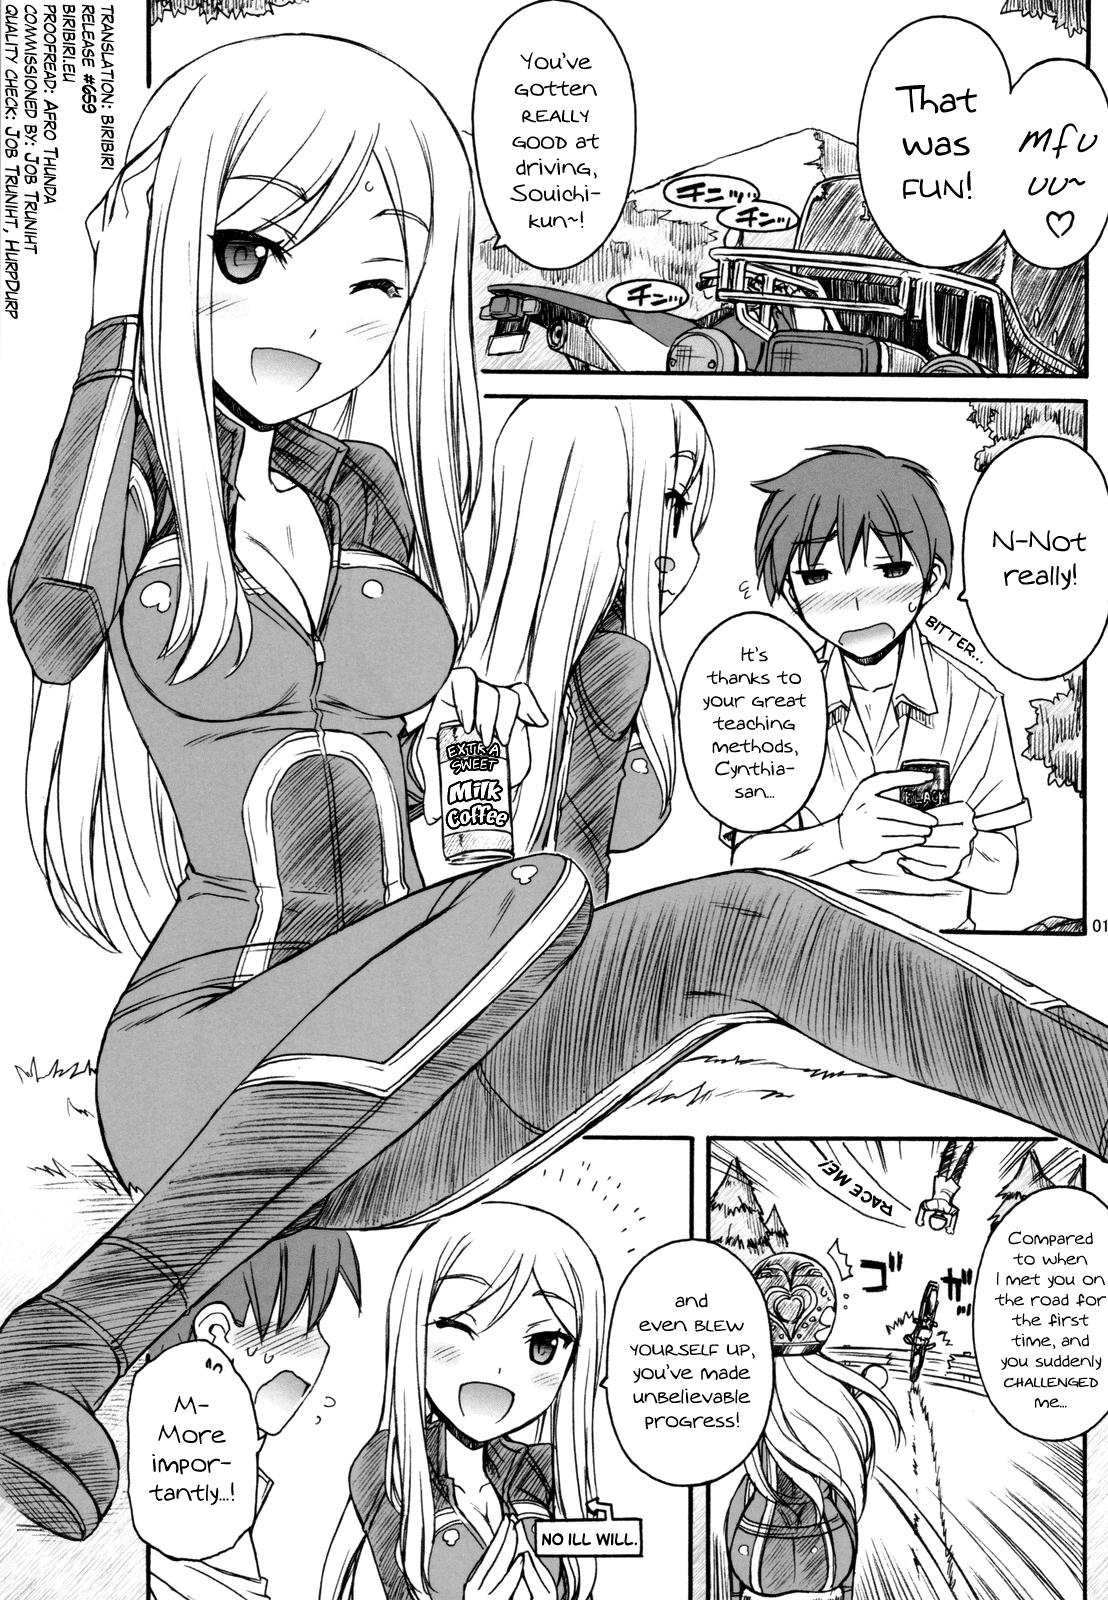 White Girl One One Off Off - One off Caseiro - Page 2